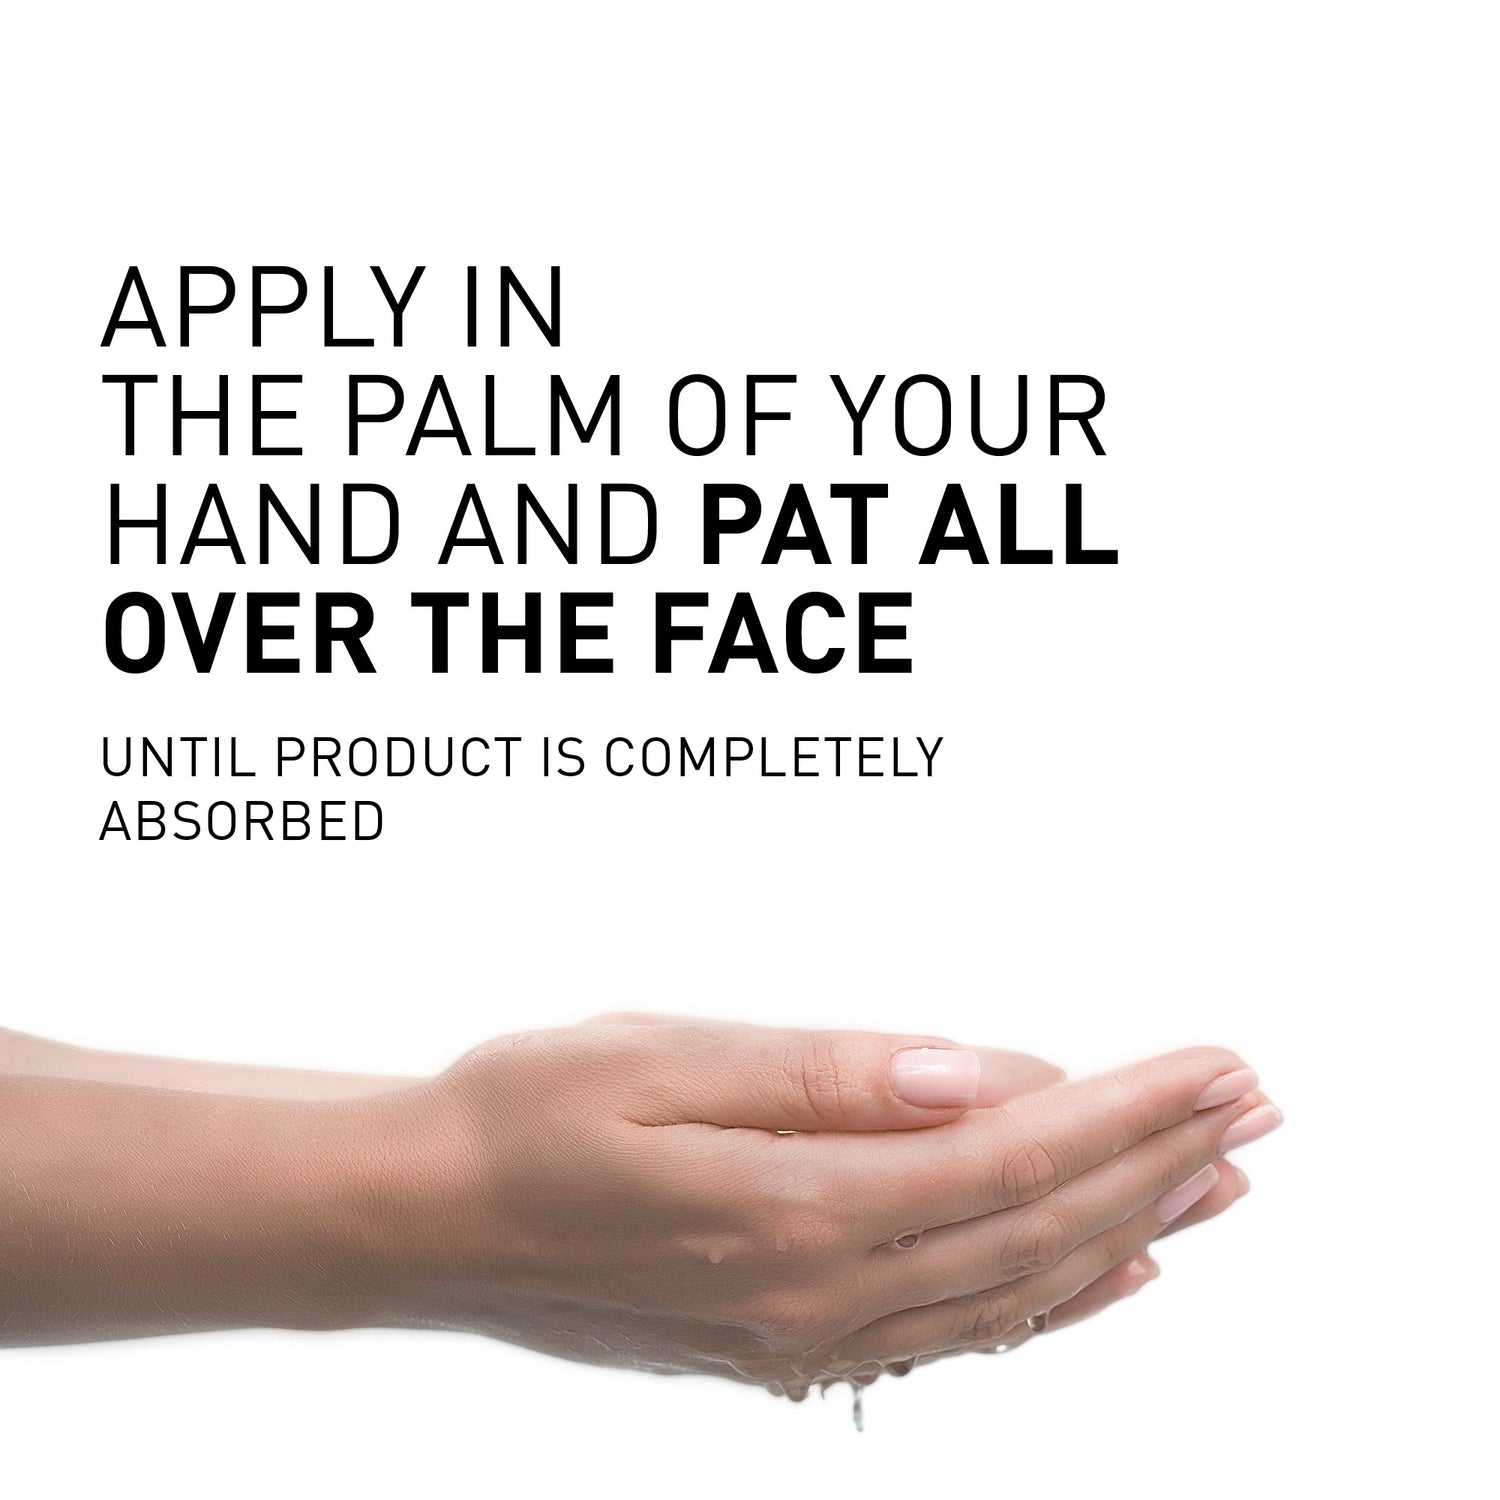 TIME-FILLER ESSENCE - Apply in the palm of your hand and pat all over the face until product is completetly absorbed